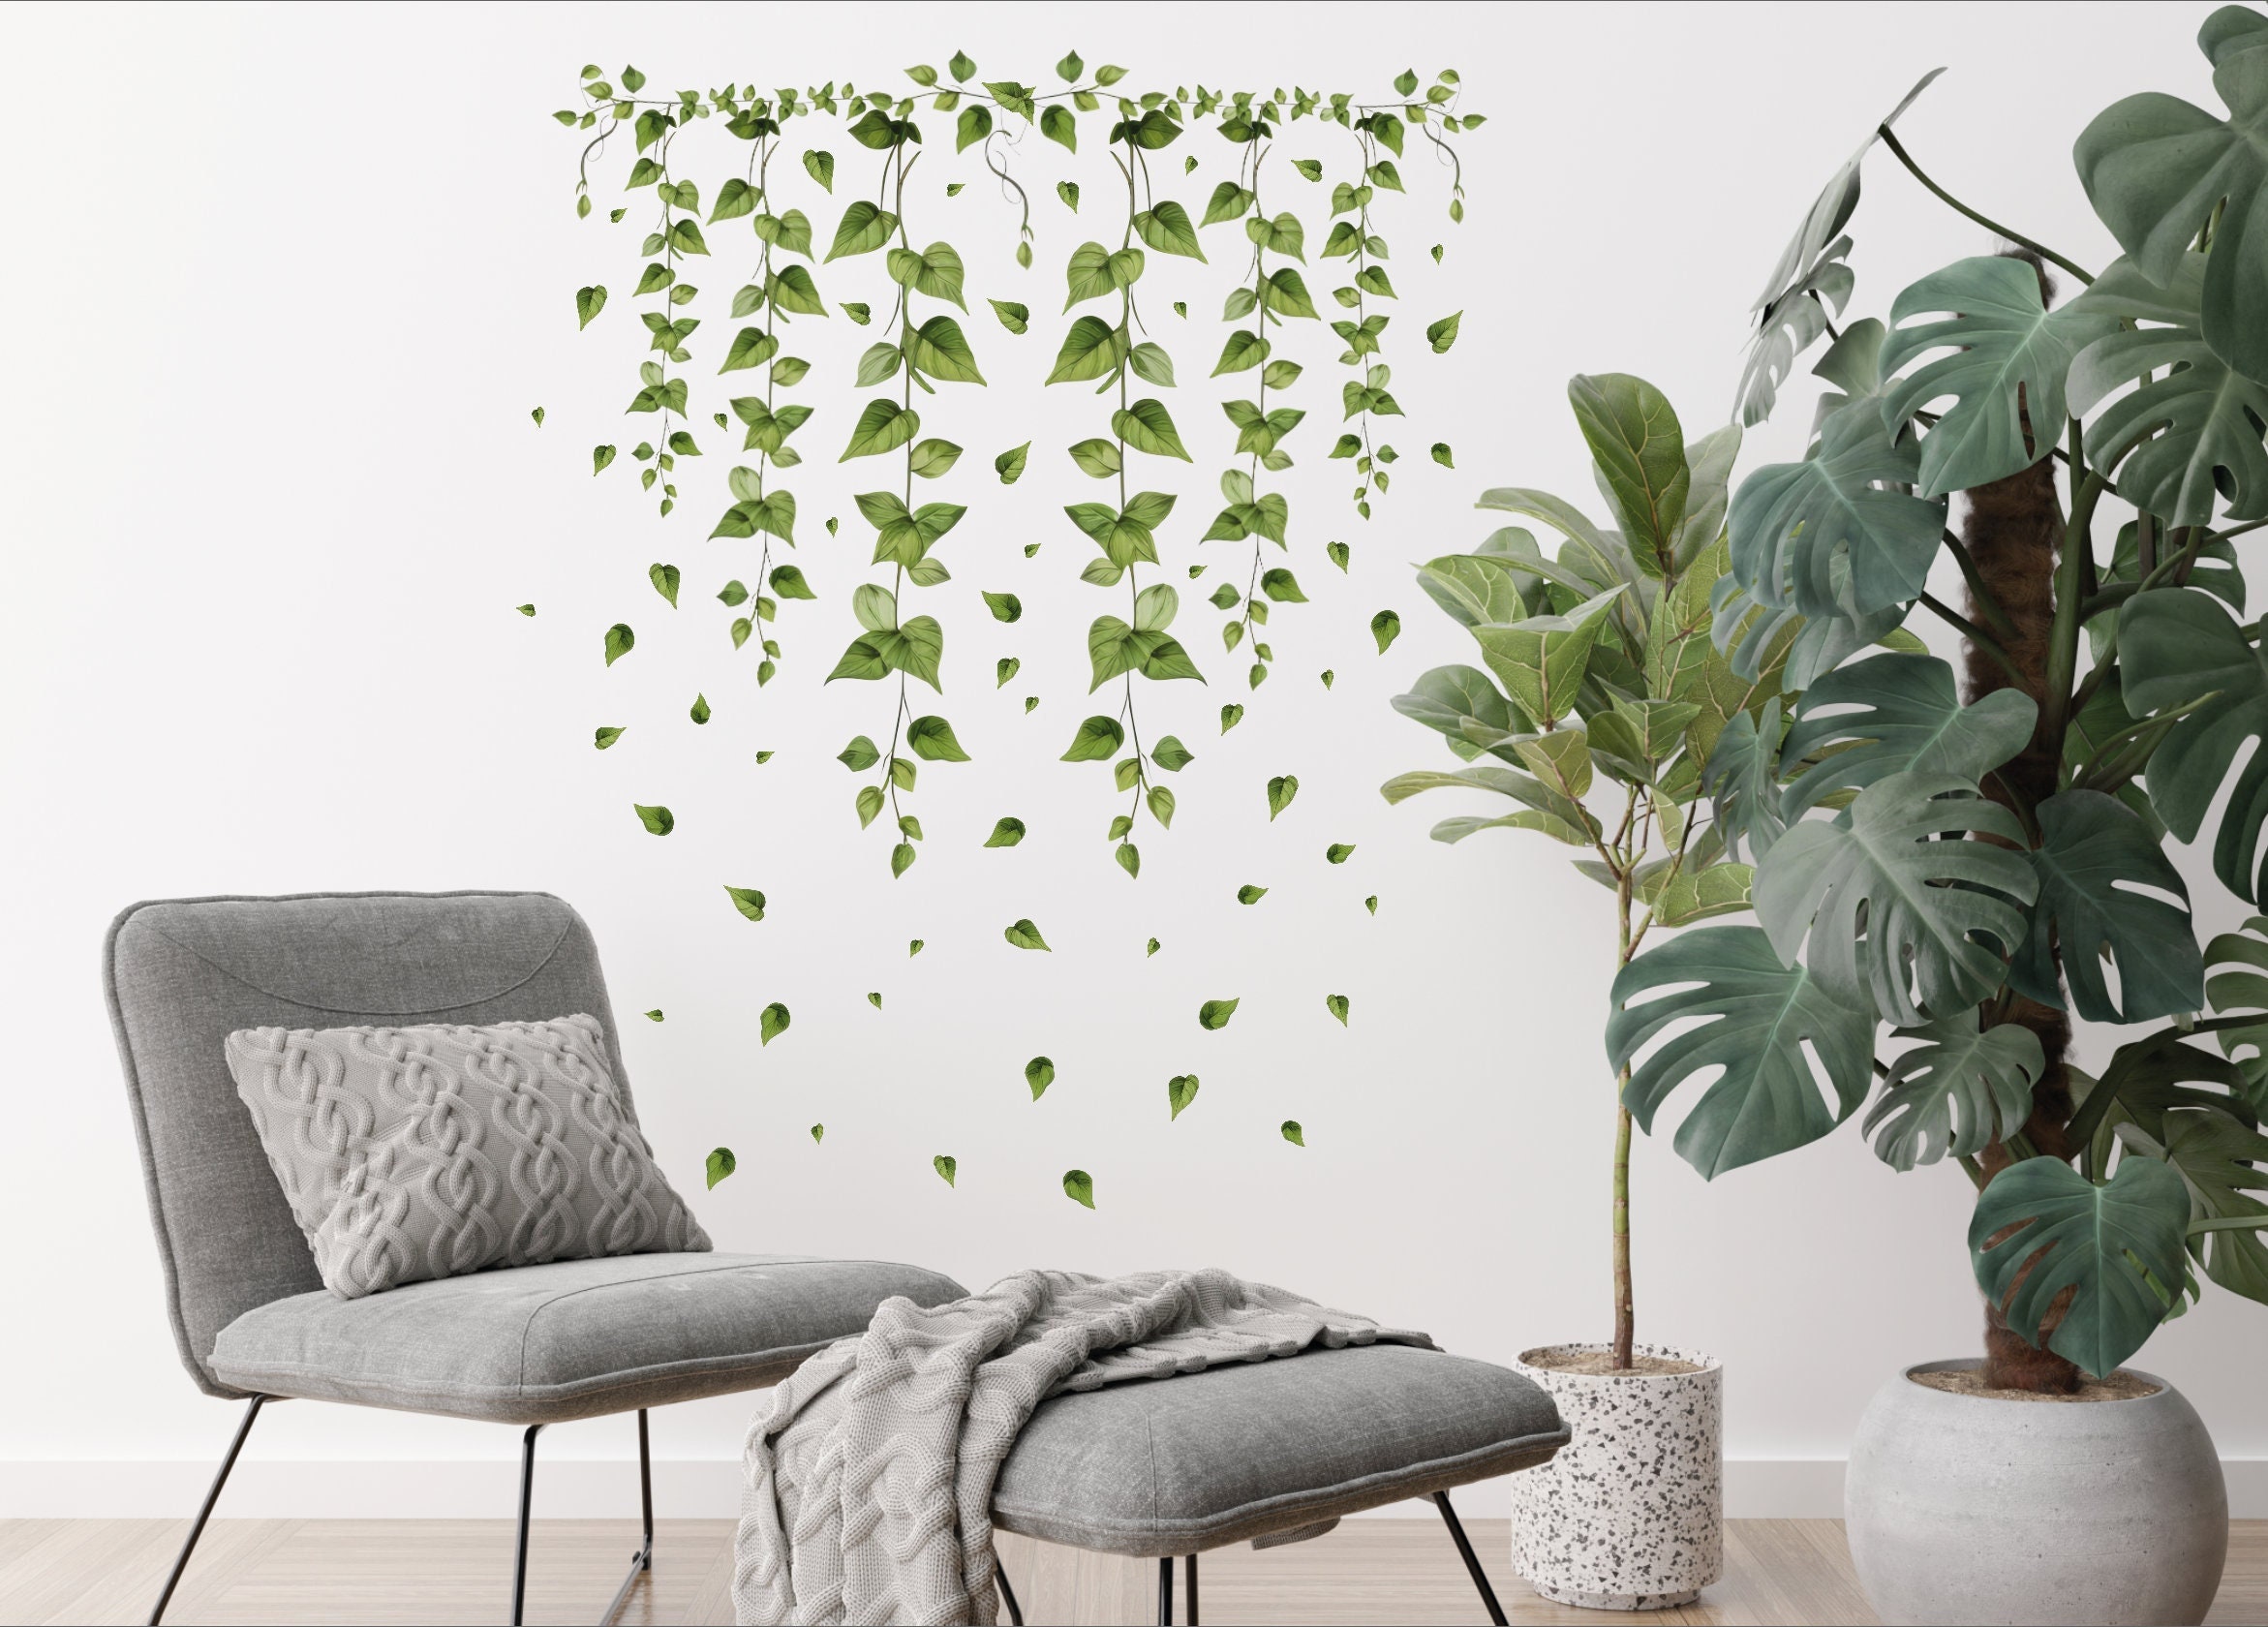 Artificial Ivy Vines Leaves Greenery Garland Boho Chic Décor Fake Faux  Plant 